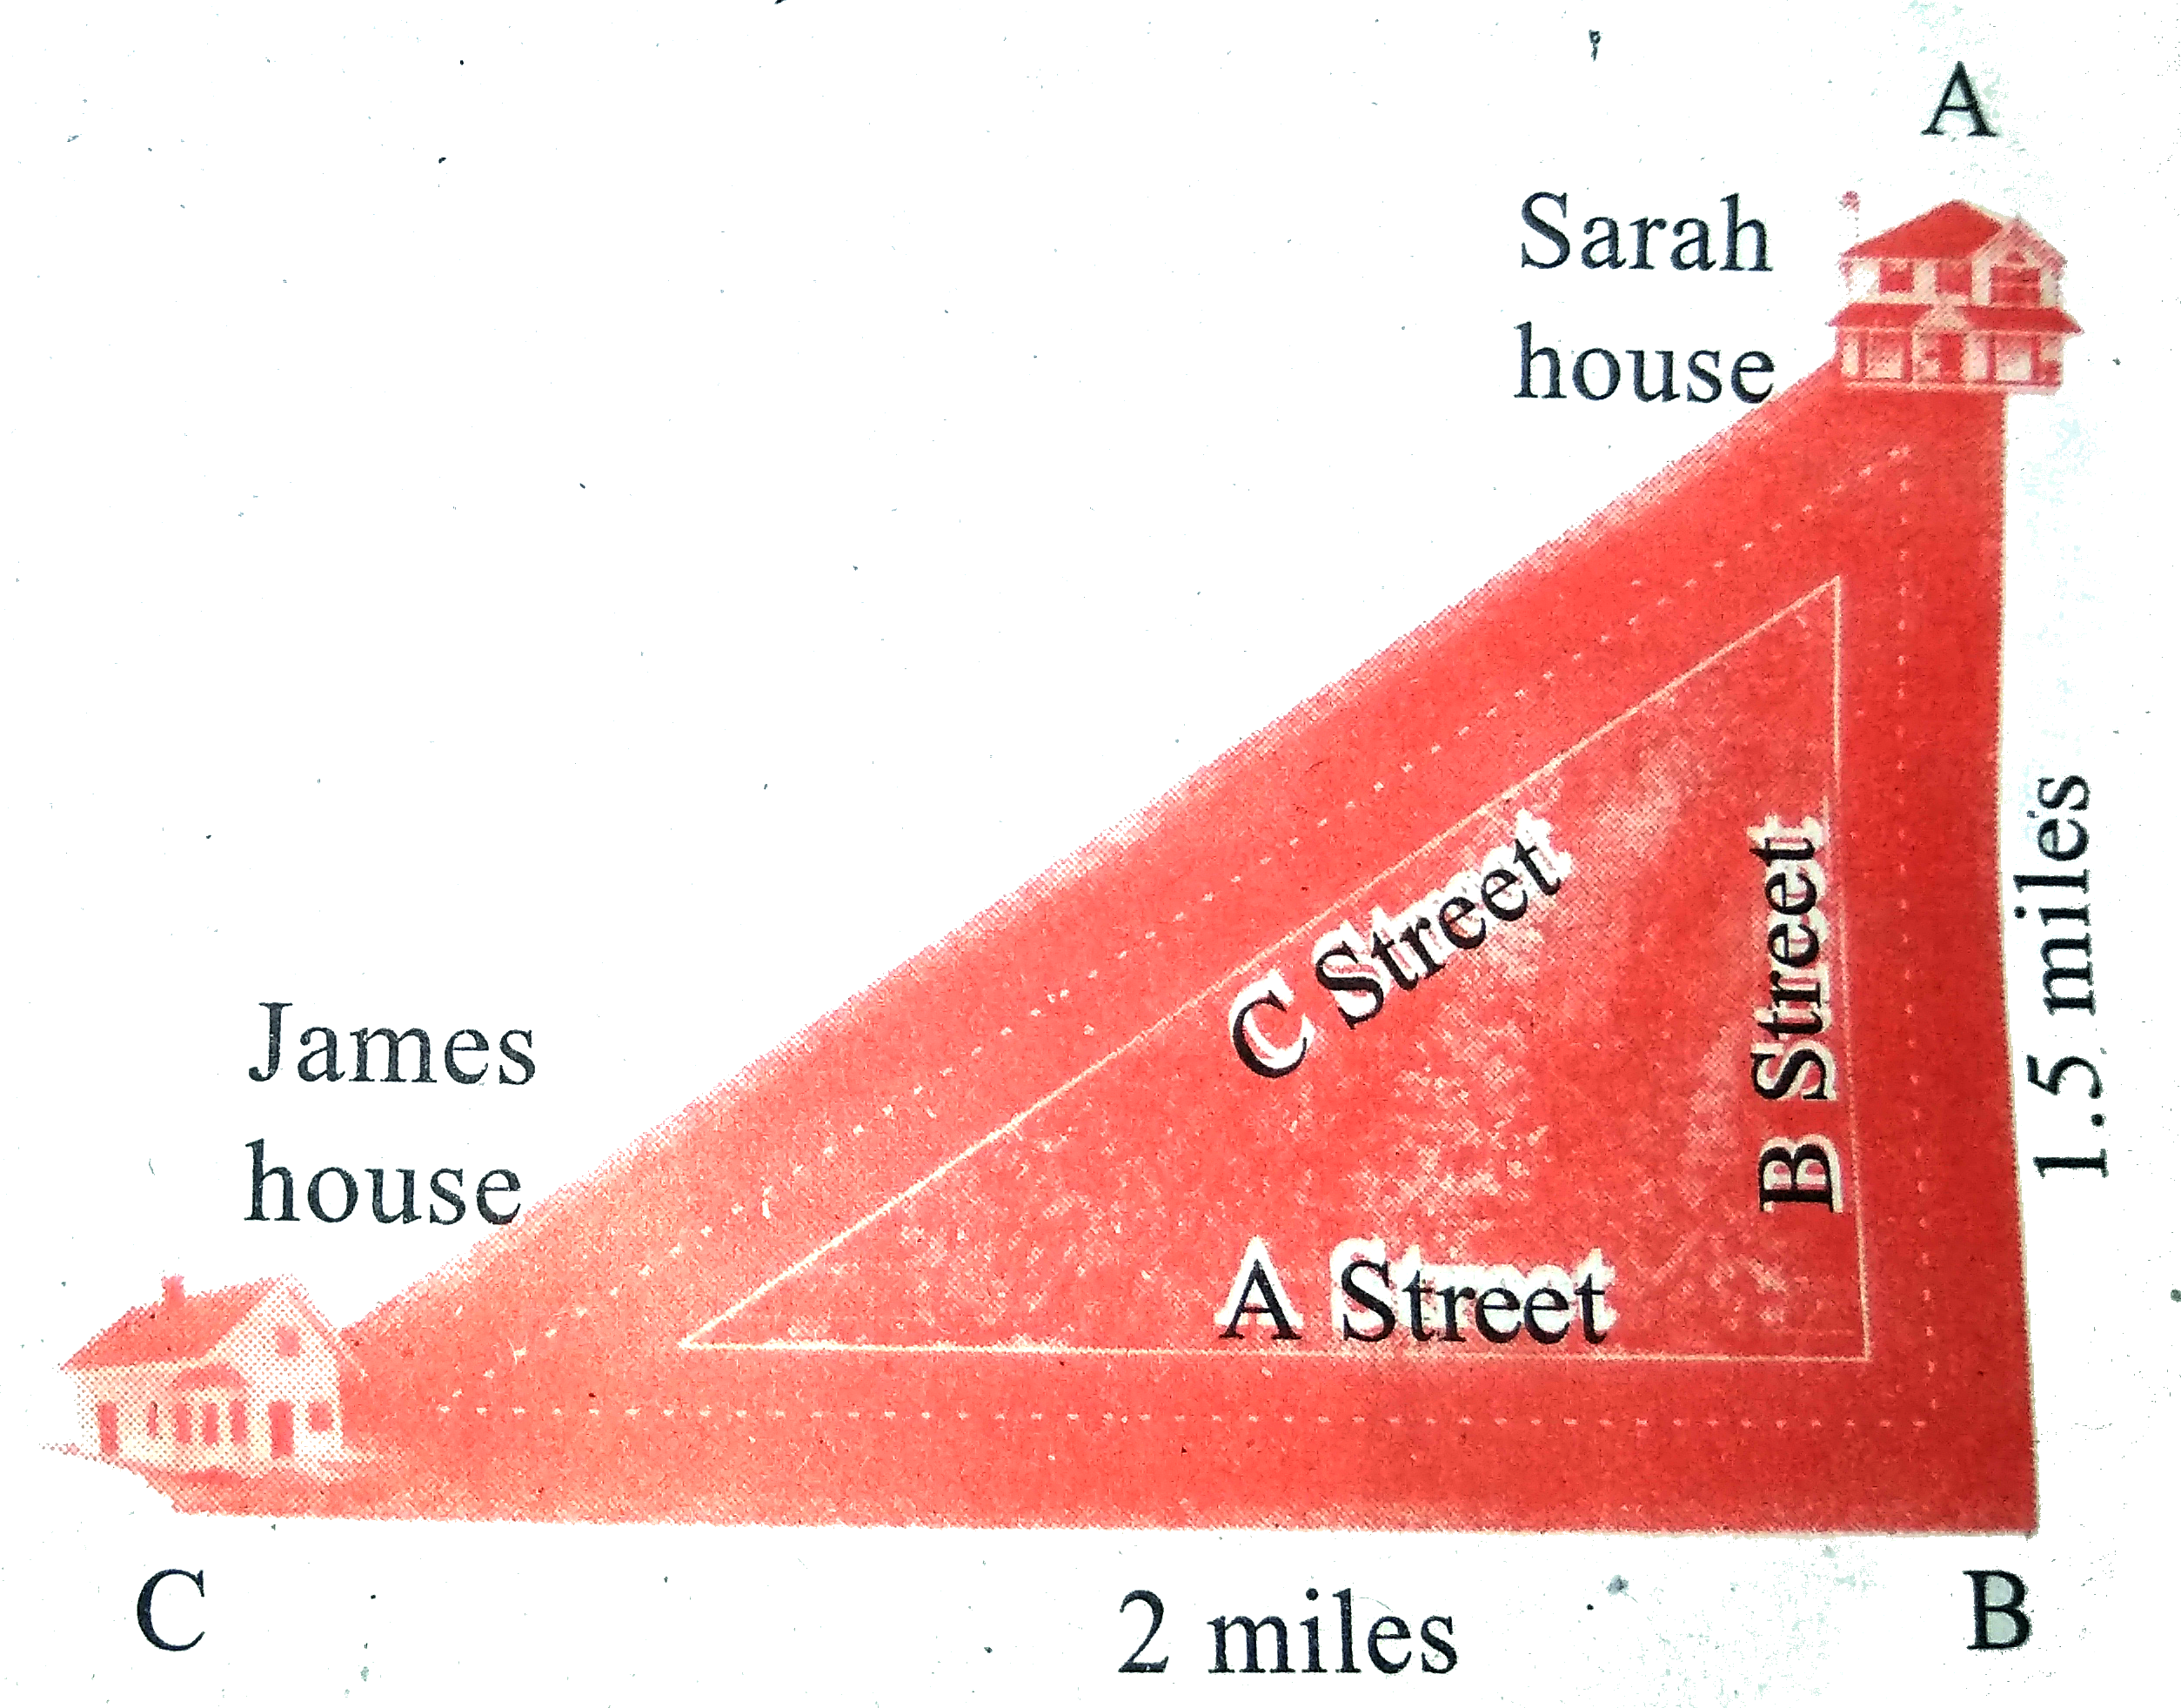 There are two paths that one can choose to go from Sarah's house to James house. One way is to take C street, and the other way requires to take A street and then B street. How much shorter is the direct path along C street ? (Using figure).